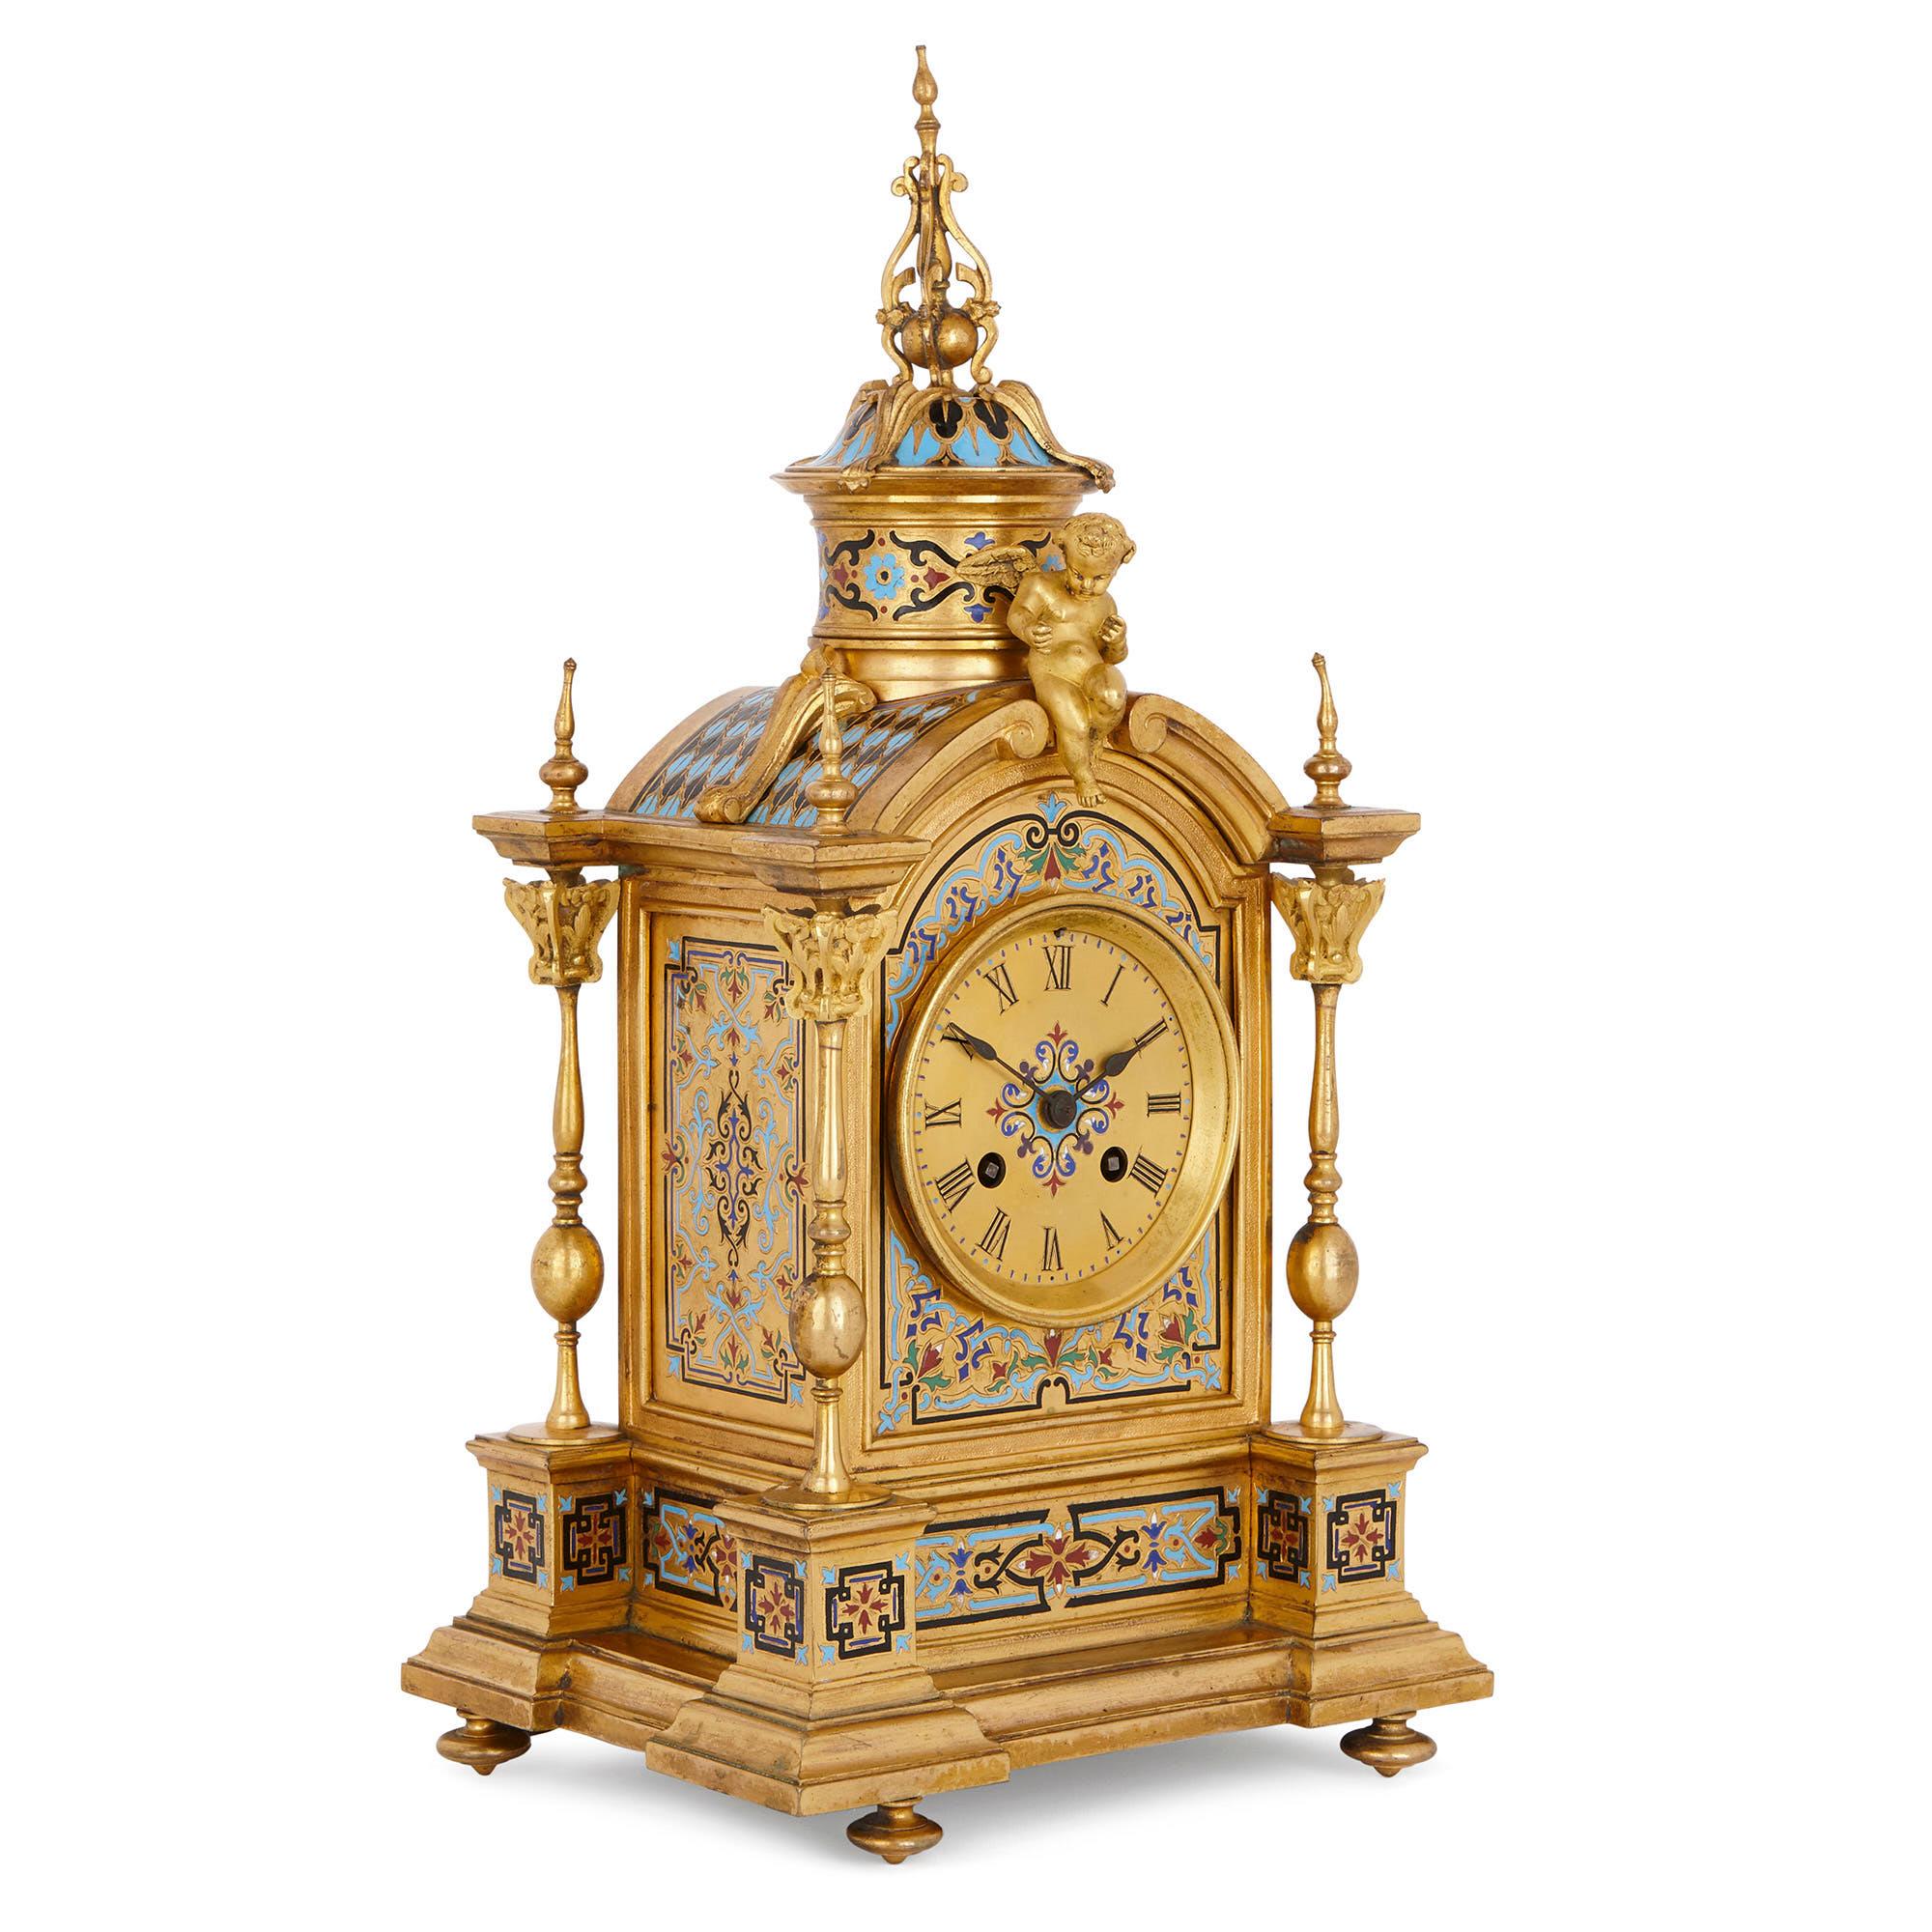 This beautiful clock set, which comprises of a mantel clock and a pair of vases, was designed in France in circa 1870 in a wonderful Renaissance Revival style. The set has been crafted from gilt bronze (ormolu) and ornately decorated with champlevé